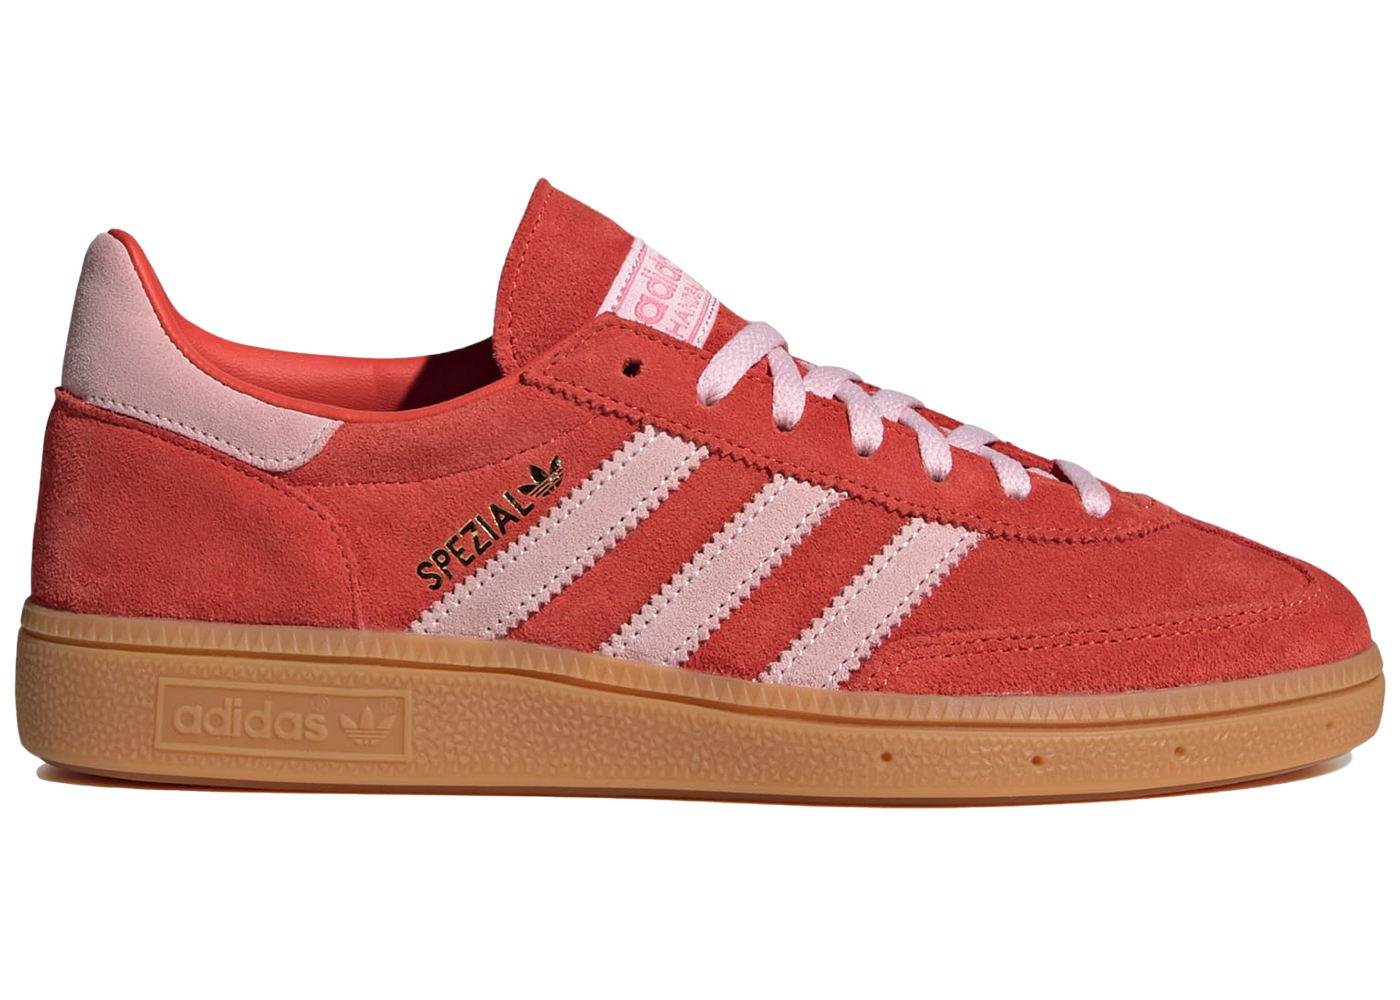 adidas Handball Spezial Bright Red Clear Pink (Women's) - IE5894 - US